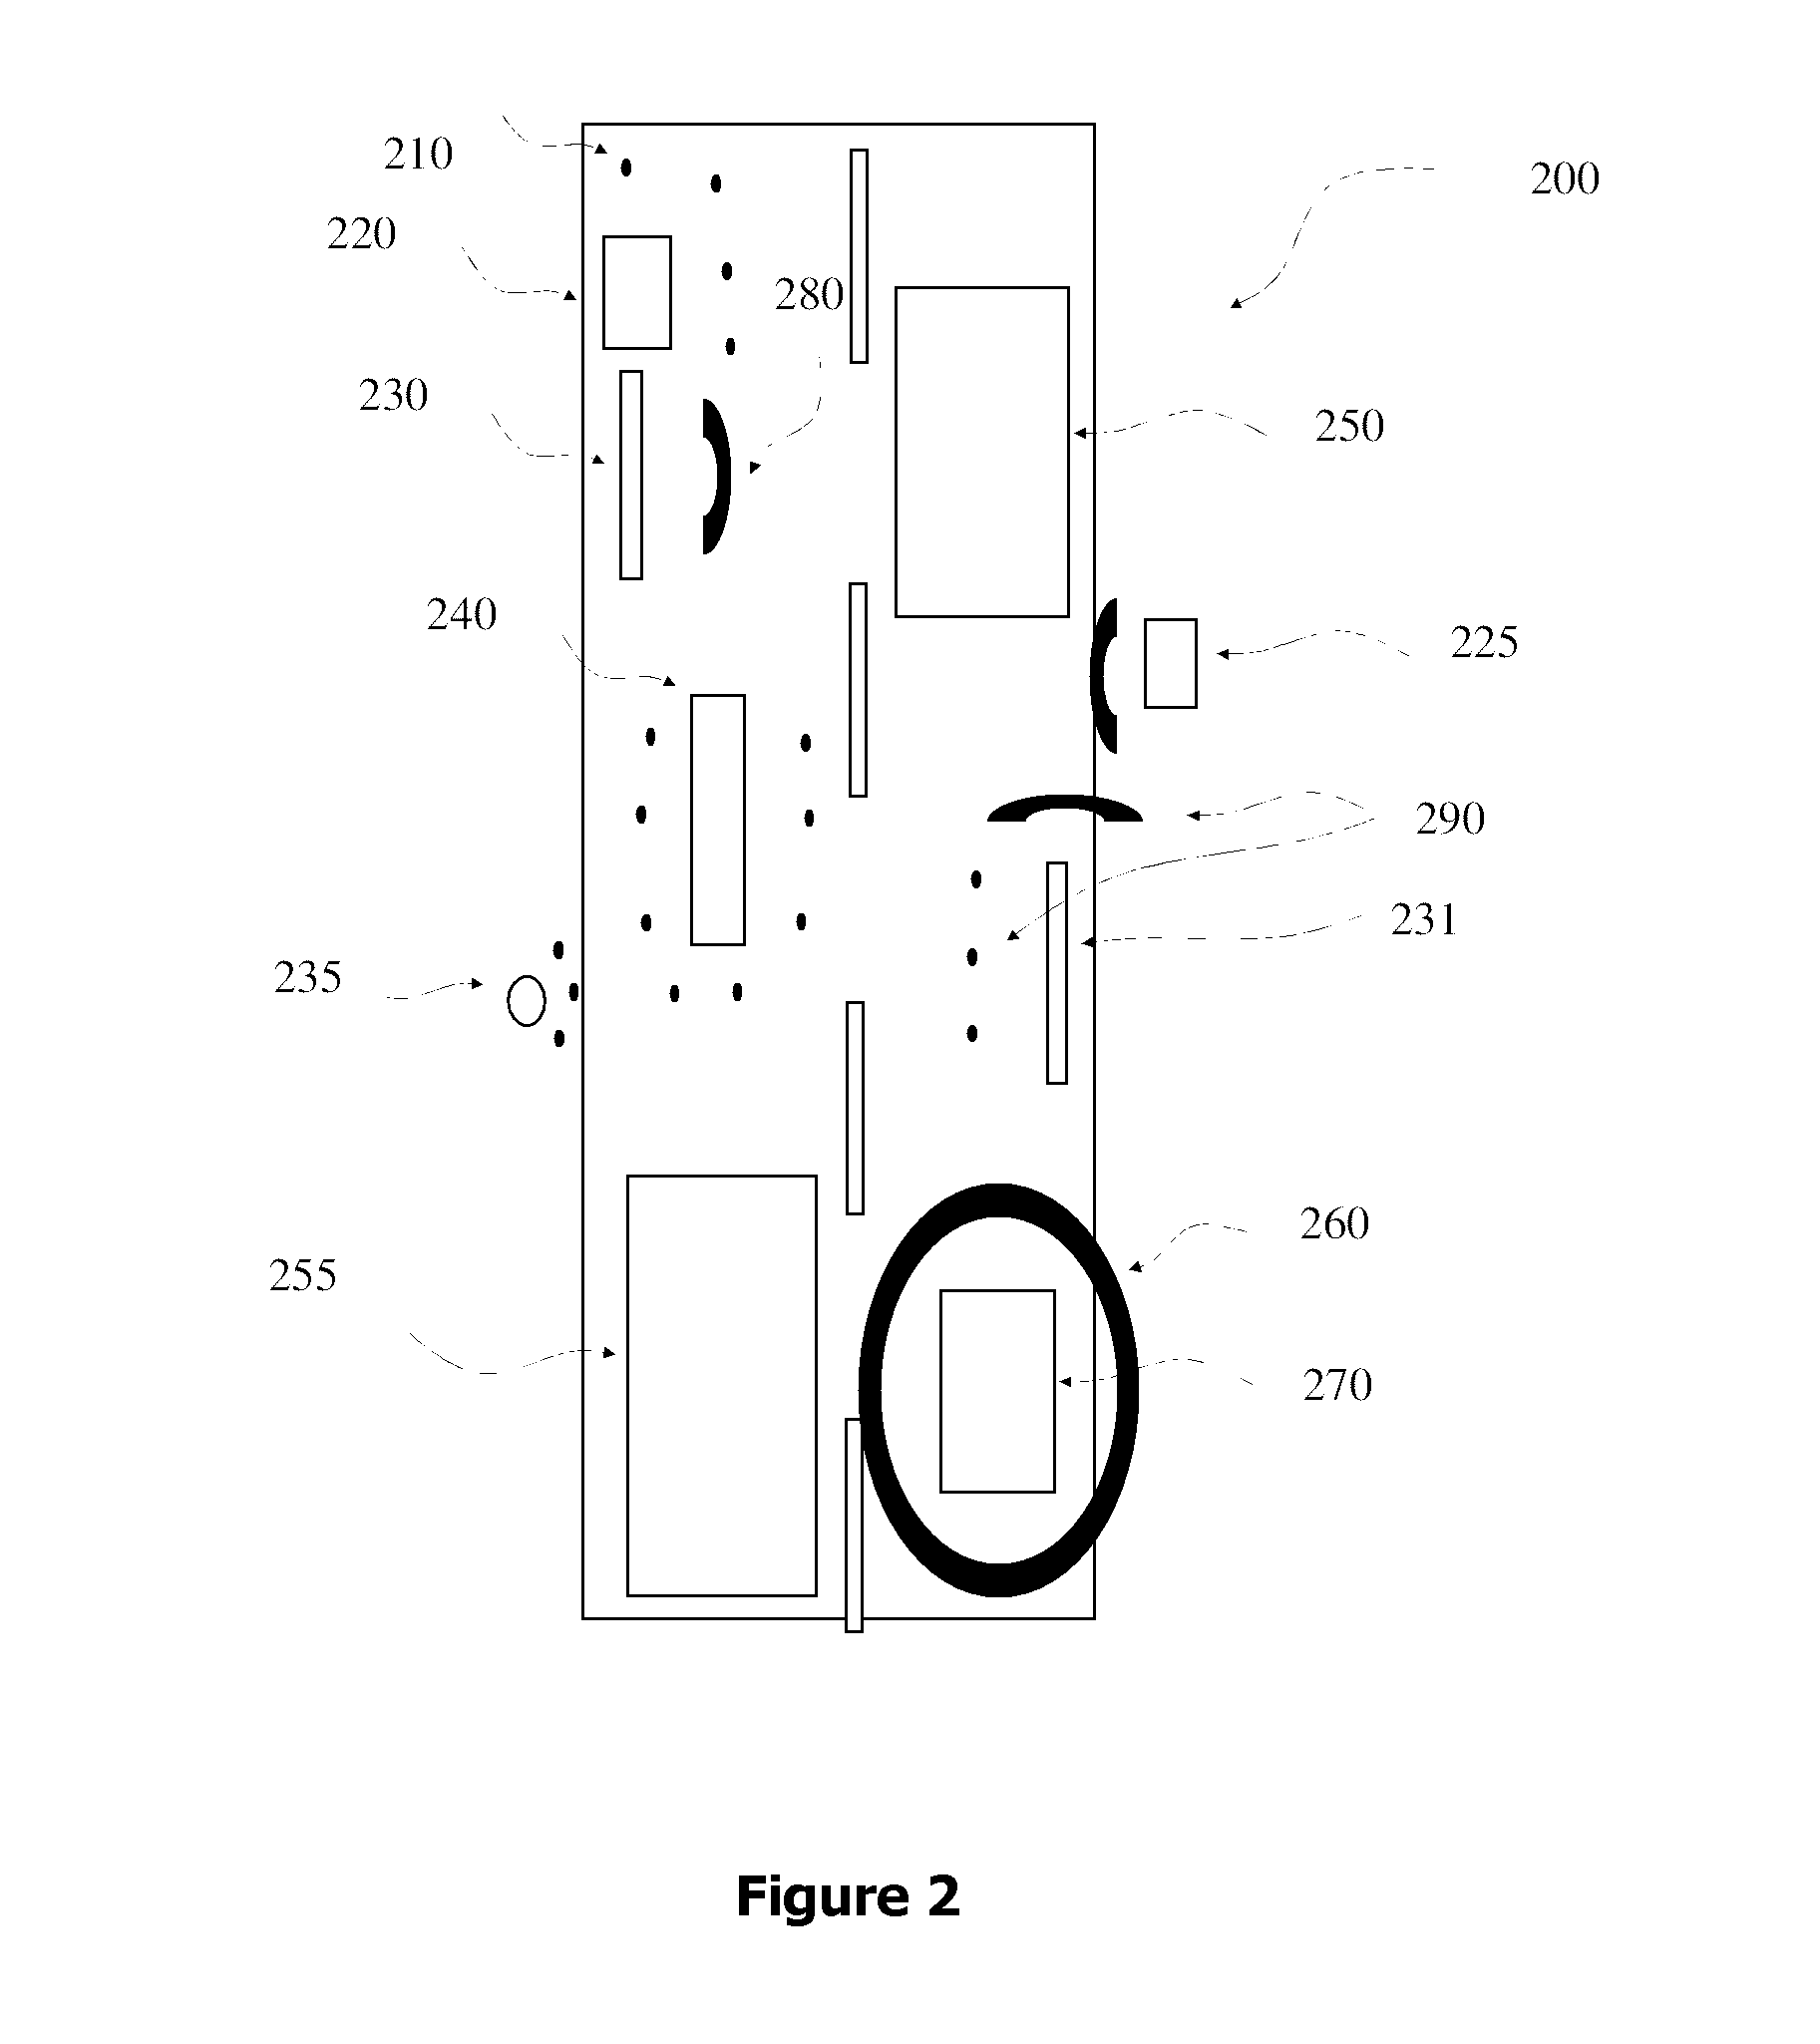 Apparatus and Method for Defining a Safety Zone for a Vehicle